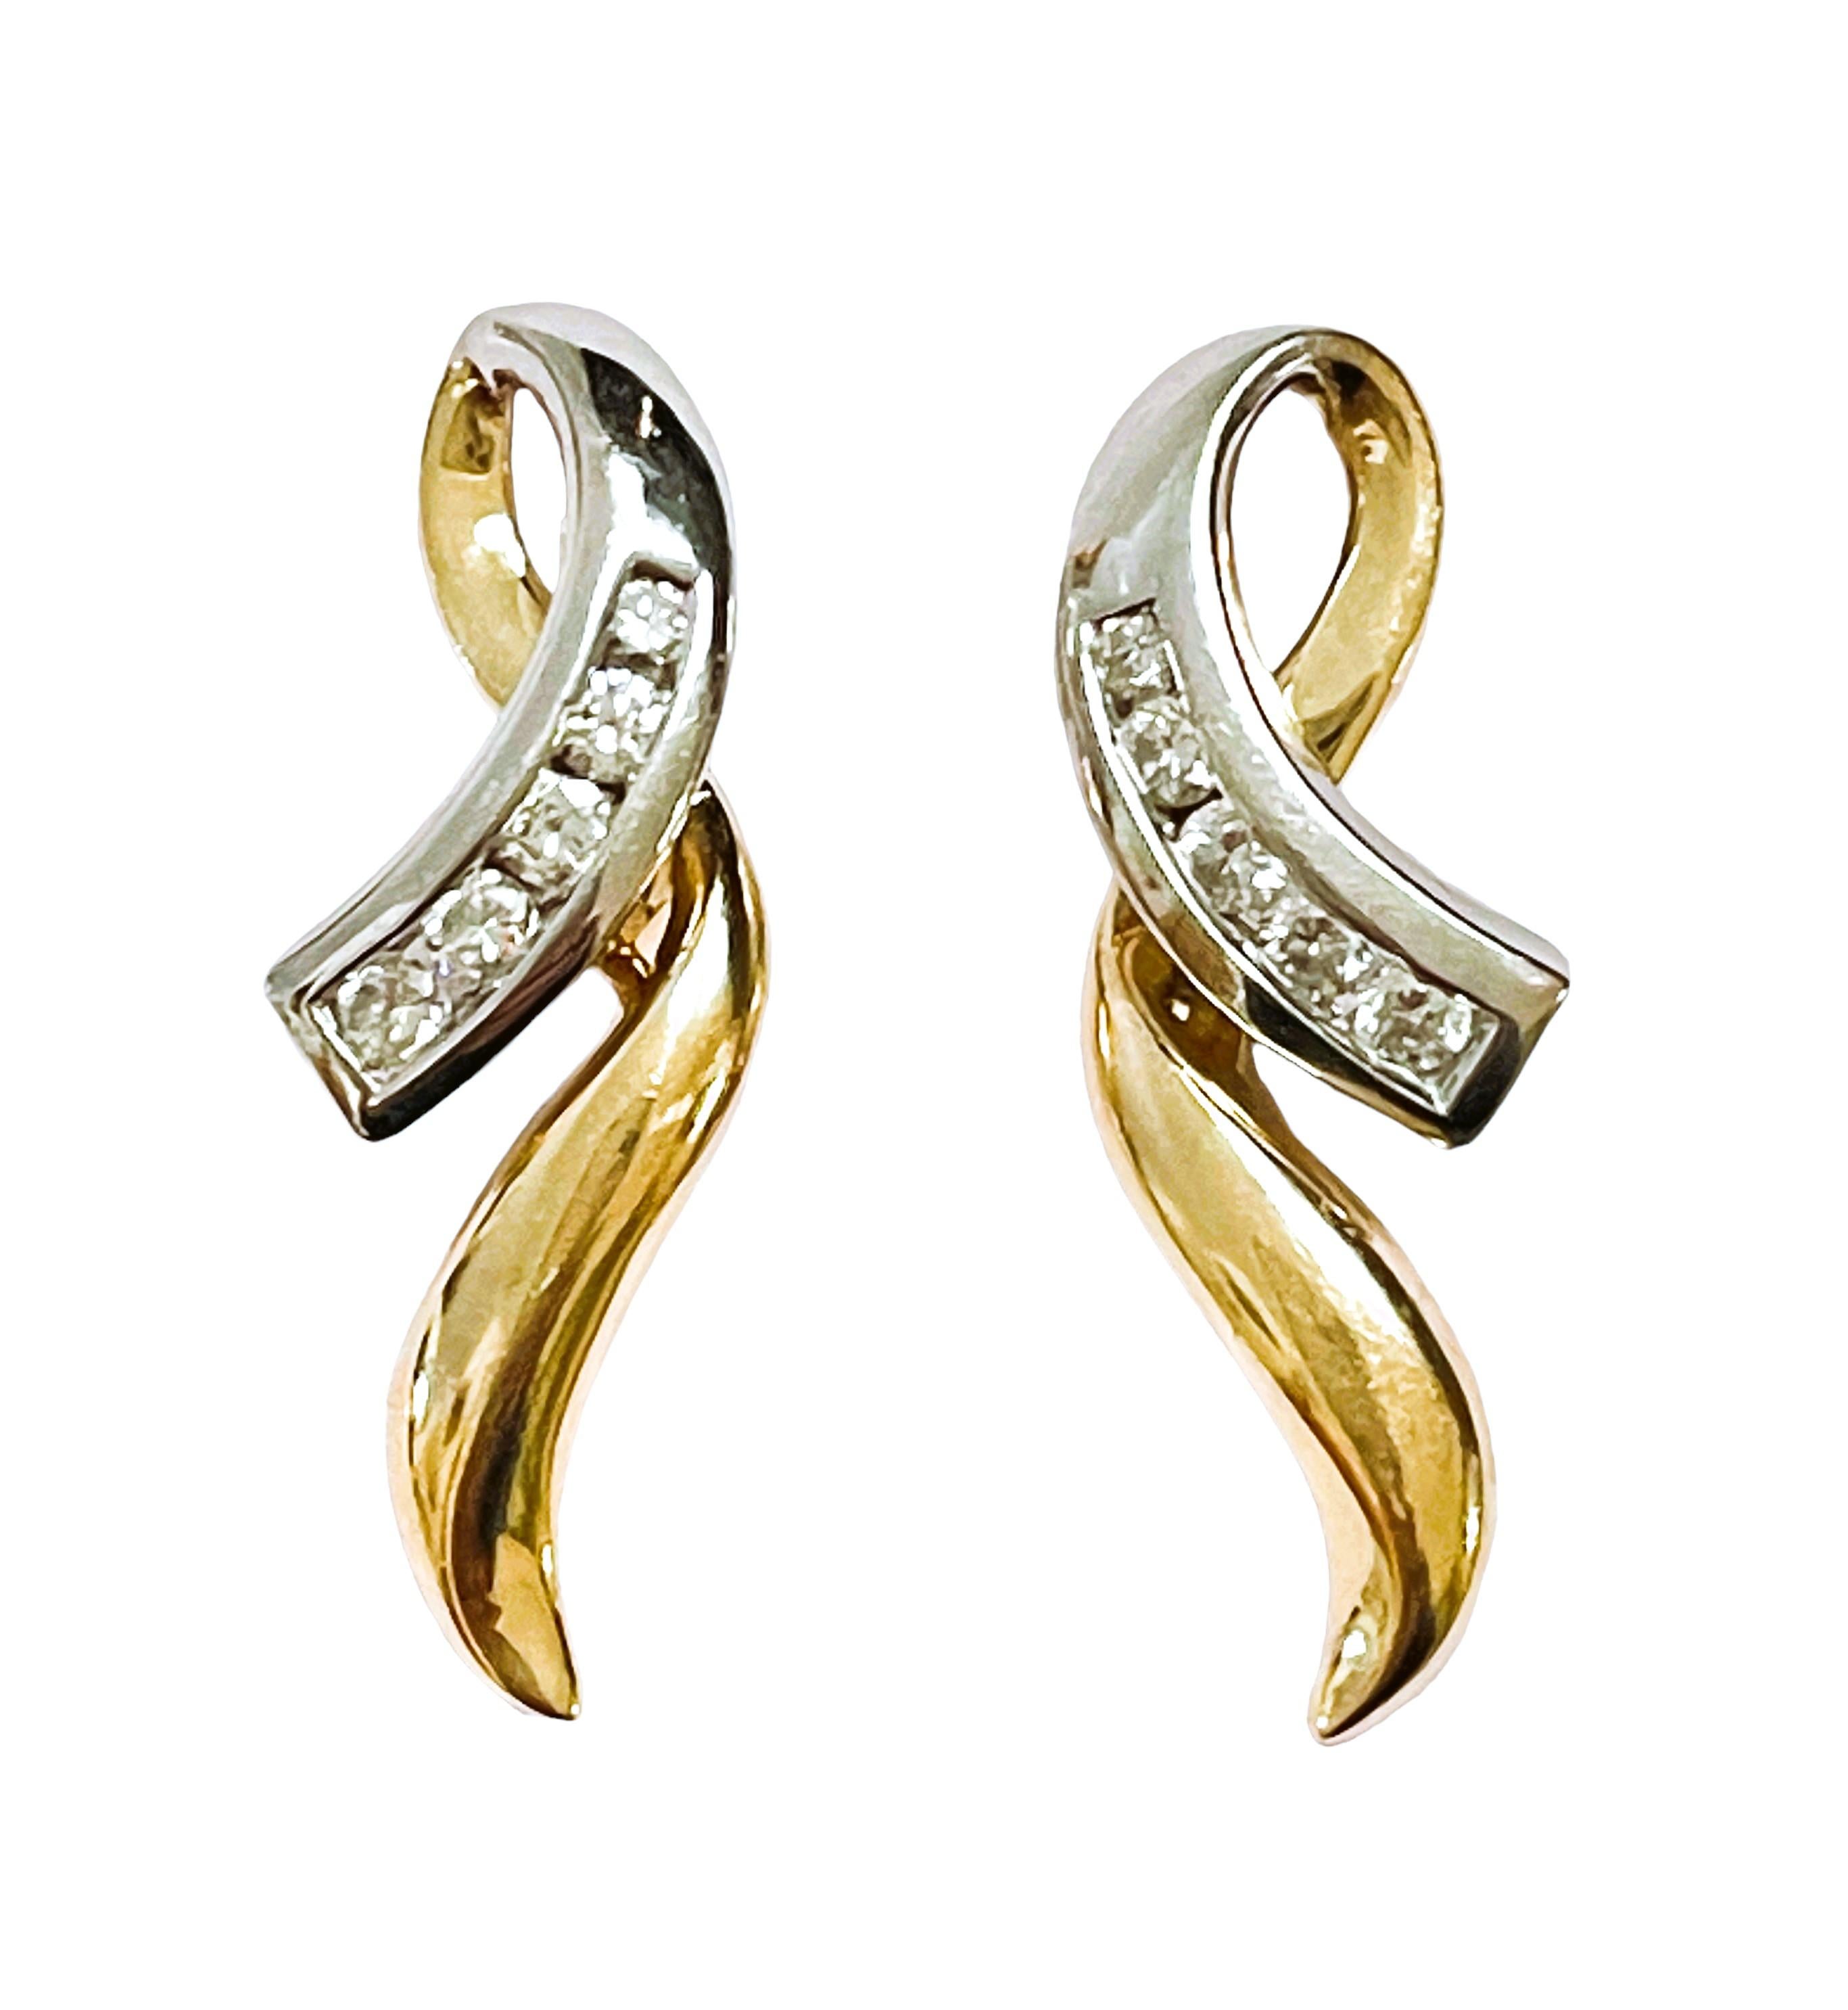 This is a gorgeous pair of Diamond Earrings.   Very well made.  You will be proud to wear these.  They are pre-owned but in just beautiful condition.  I love the shape of them and the fact that they are both White and Yellow Gold. They are post